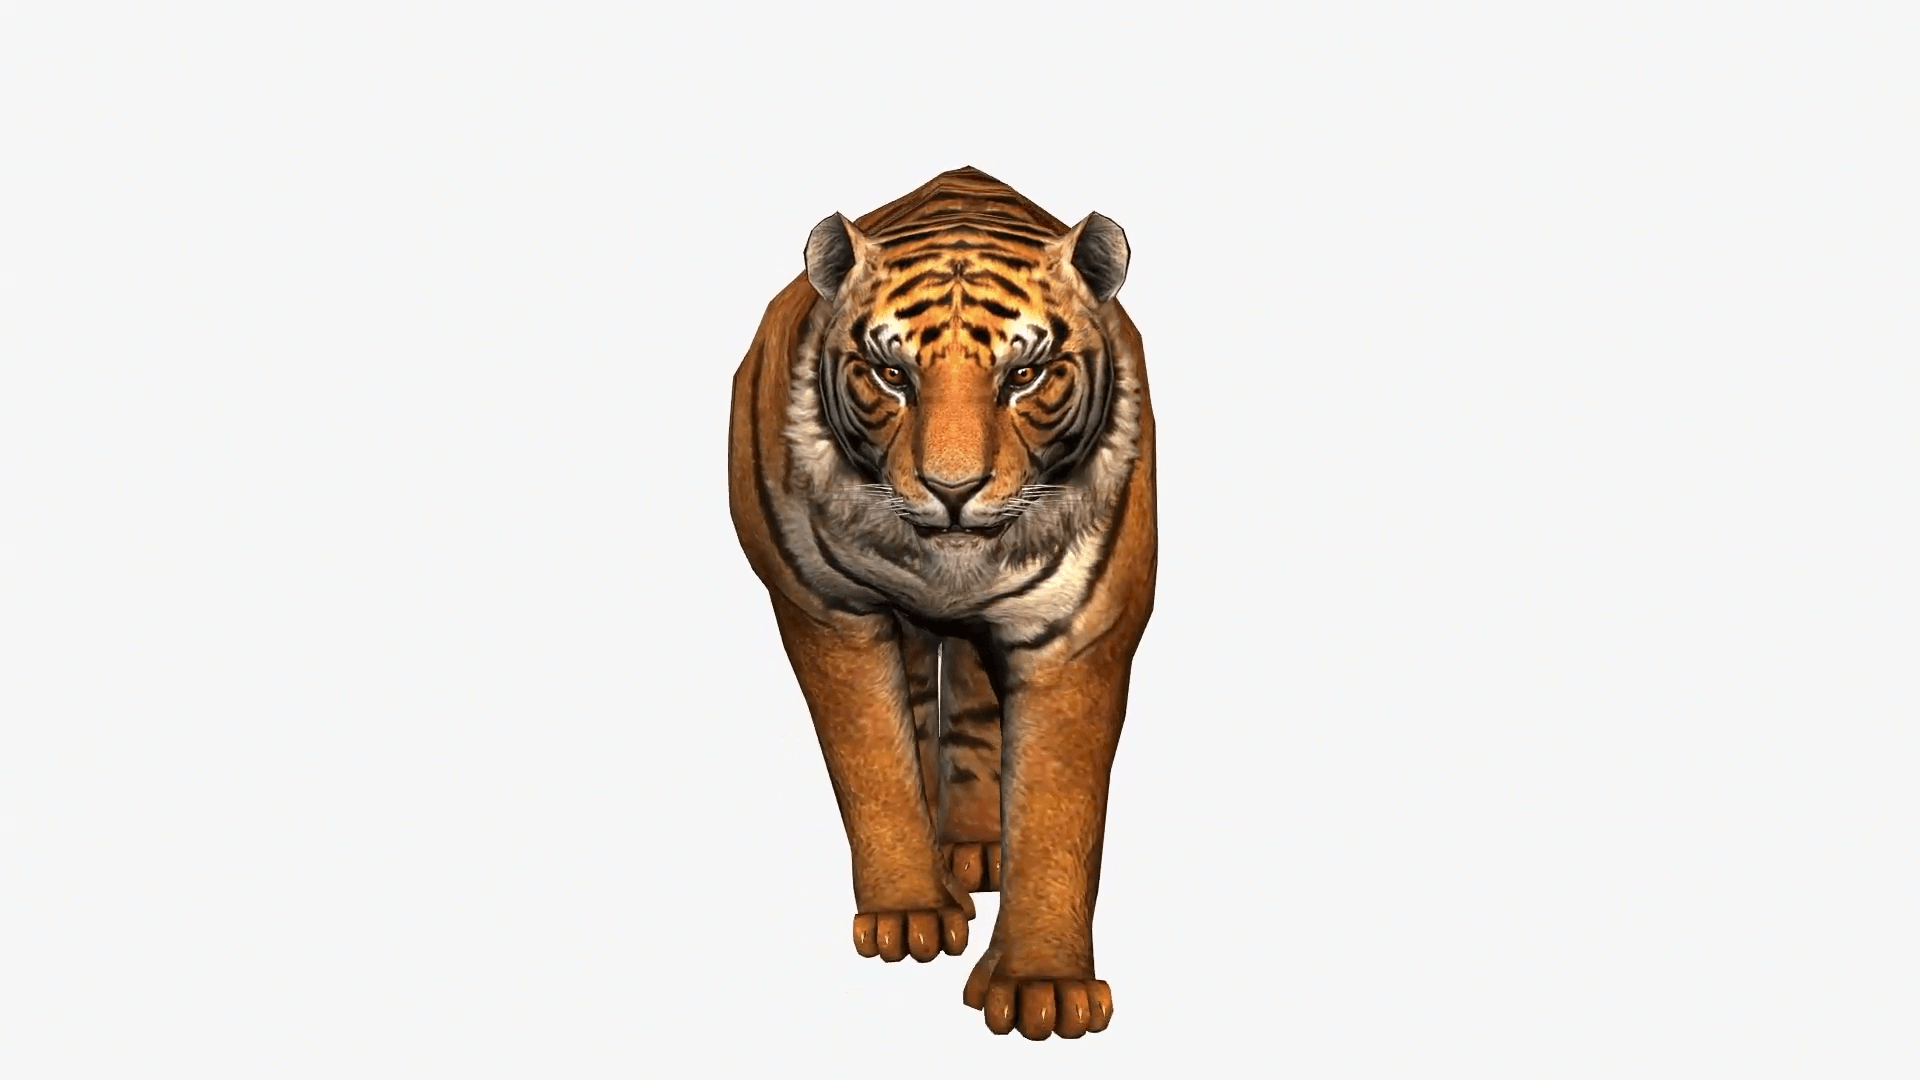 Tiger running, wild animal on white background, front view Motion